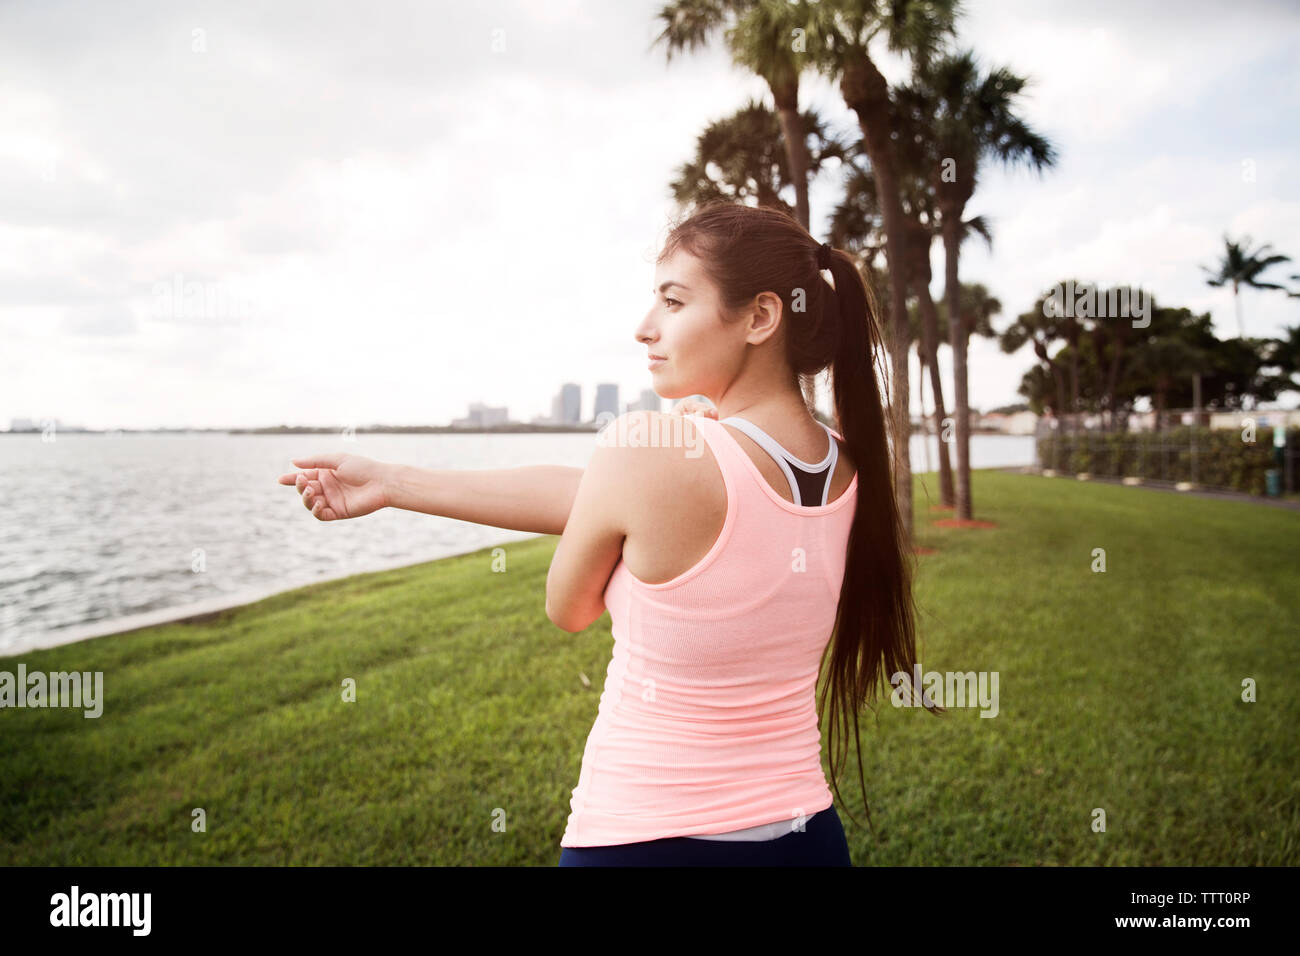 Female athlete stretching arm at grassy field against sky Stock Photo